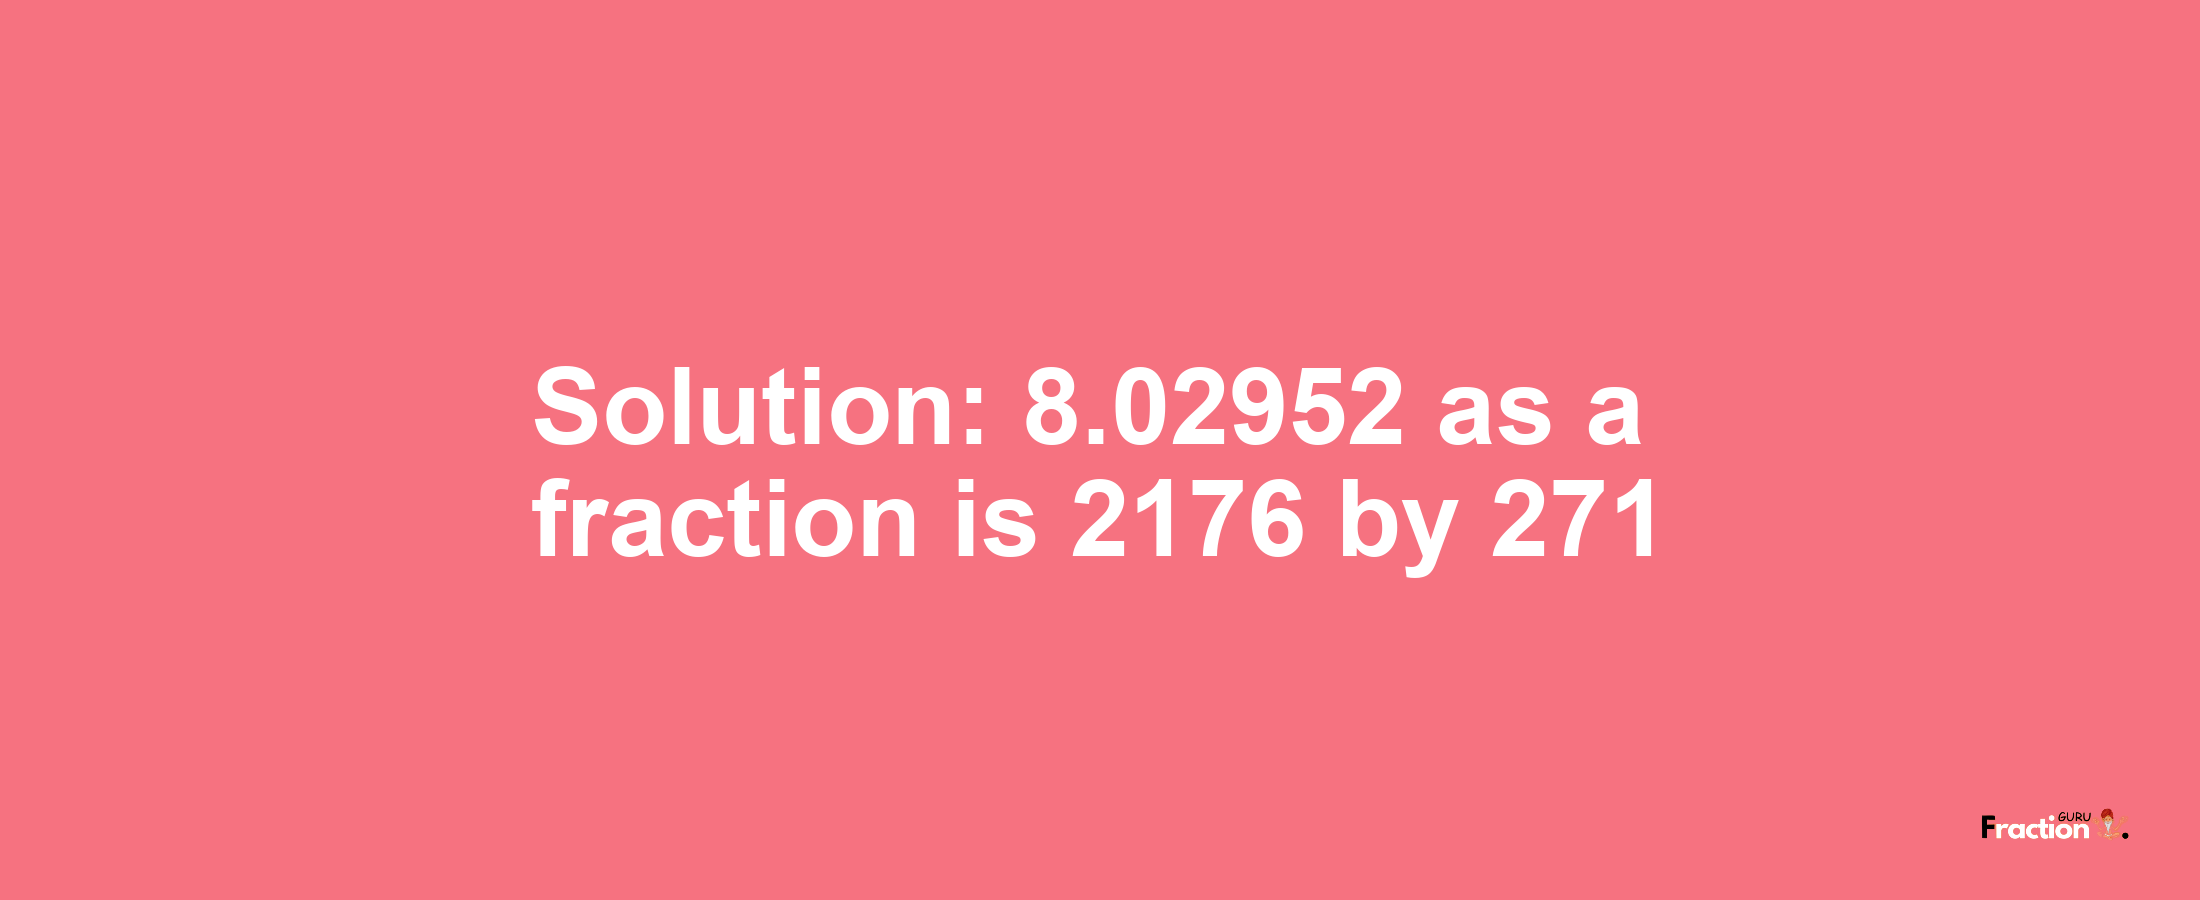 Solution:8.02952 as a fraction is 2176/271